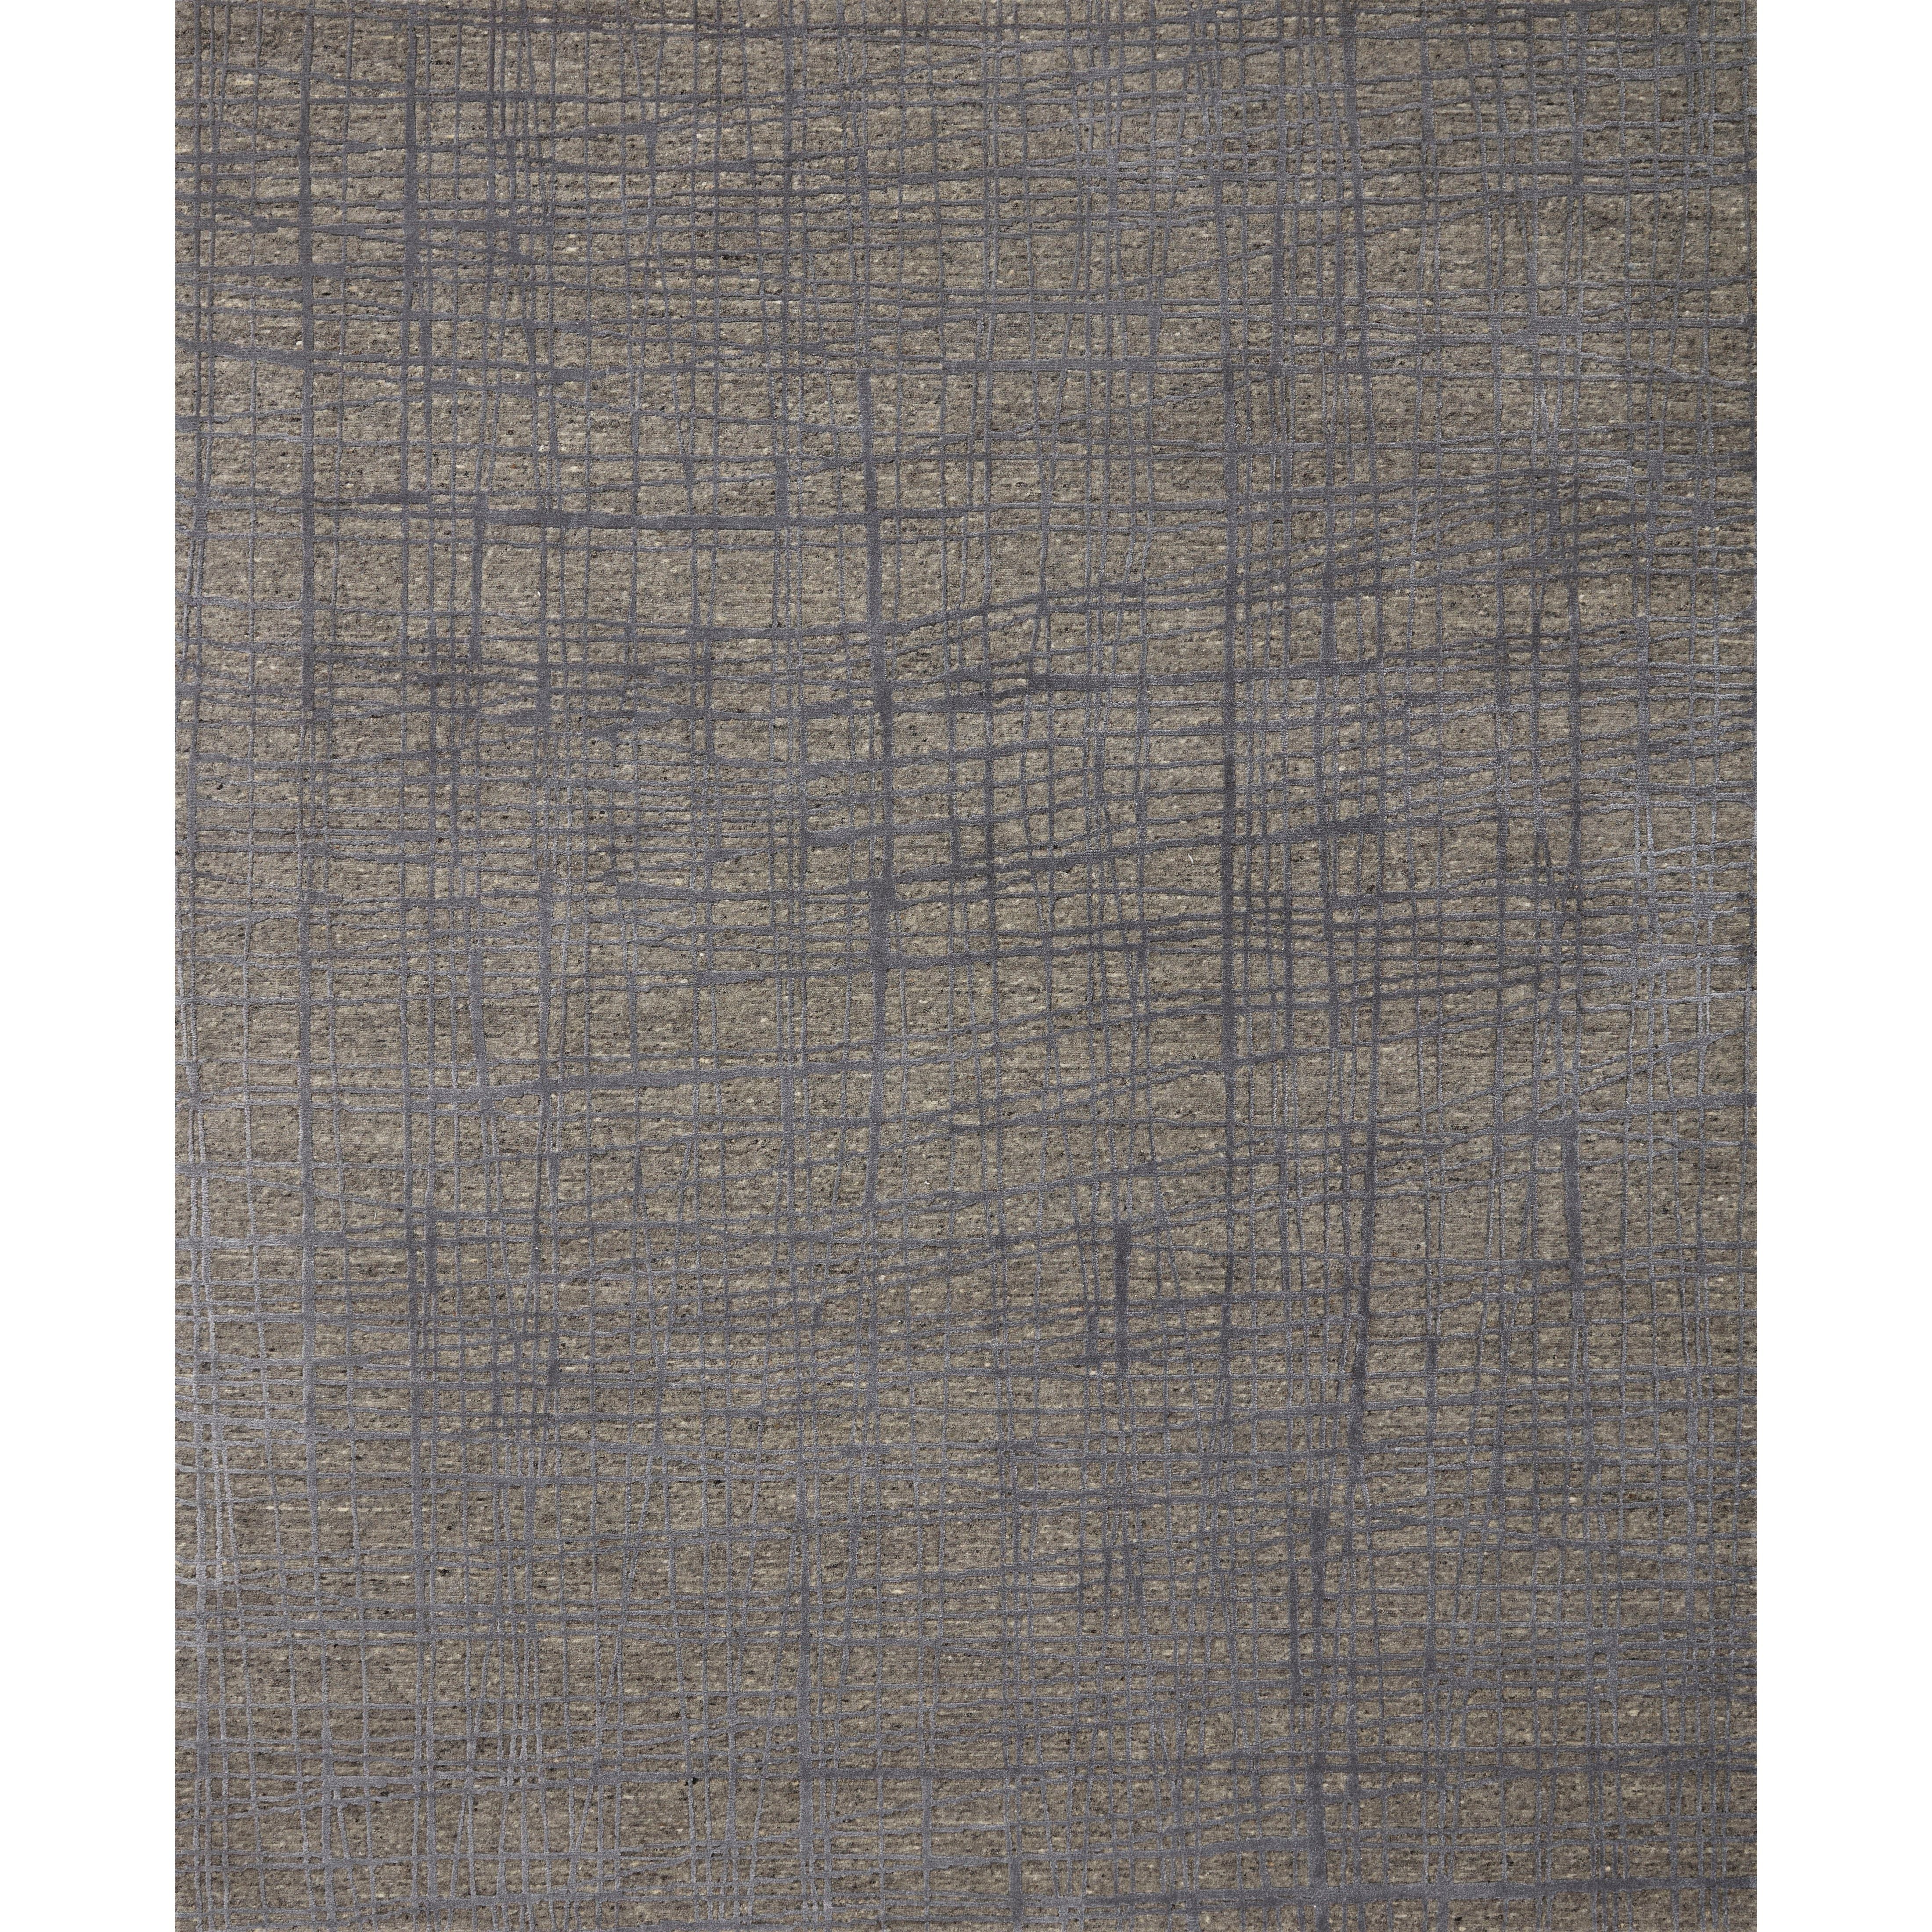 The Atlas Sage / Stone Area Rug by Loloi, or ATL-02, showcases striking contemporary patterns with a sophisticated color palette. Bold yet approachable, Atlas' muted linear designs create a sense of refined movement. Hand Knotted. Wool | Nylon